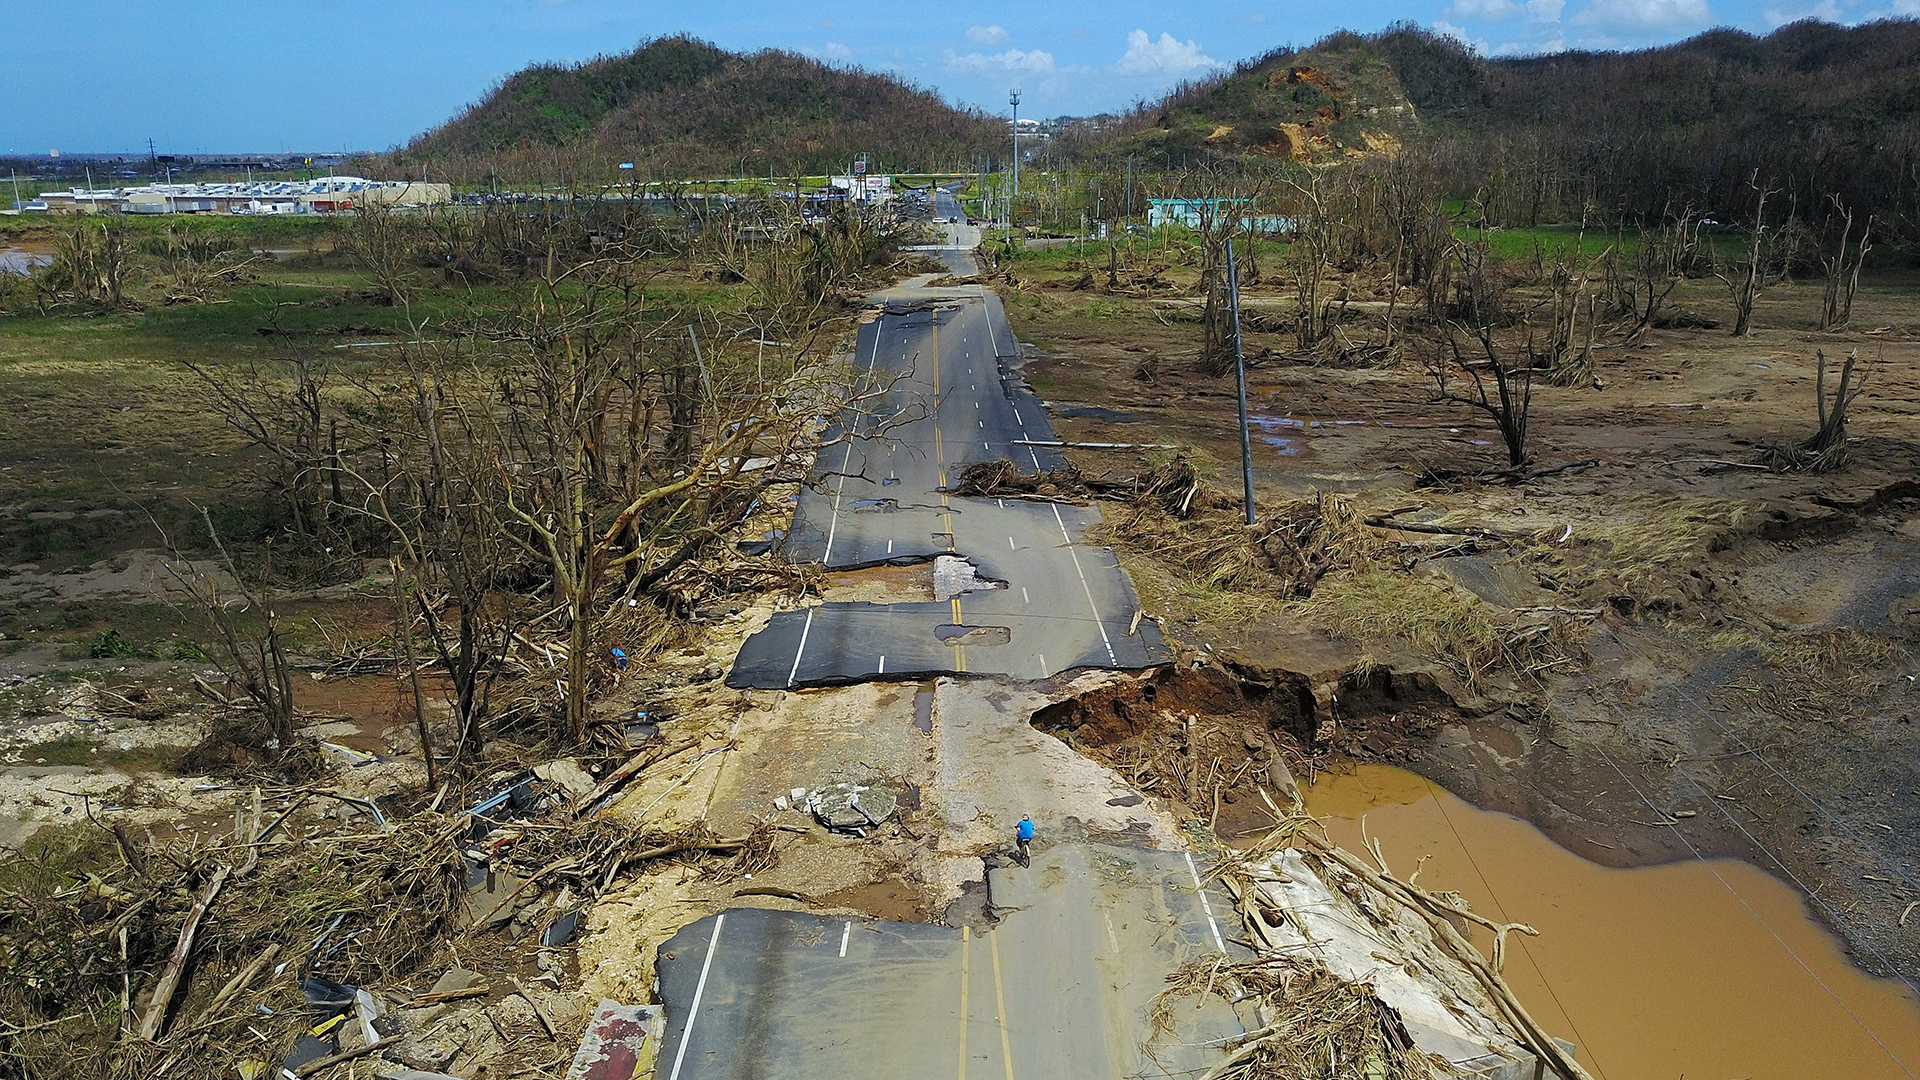 A man rides a bicycle through a damaged road in Toa Alta, west of San Juan, Puerto Rico, on September 24, 2017 following the passage of Hurricane Maria.